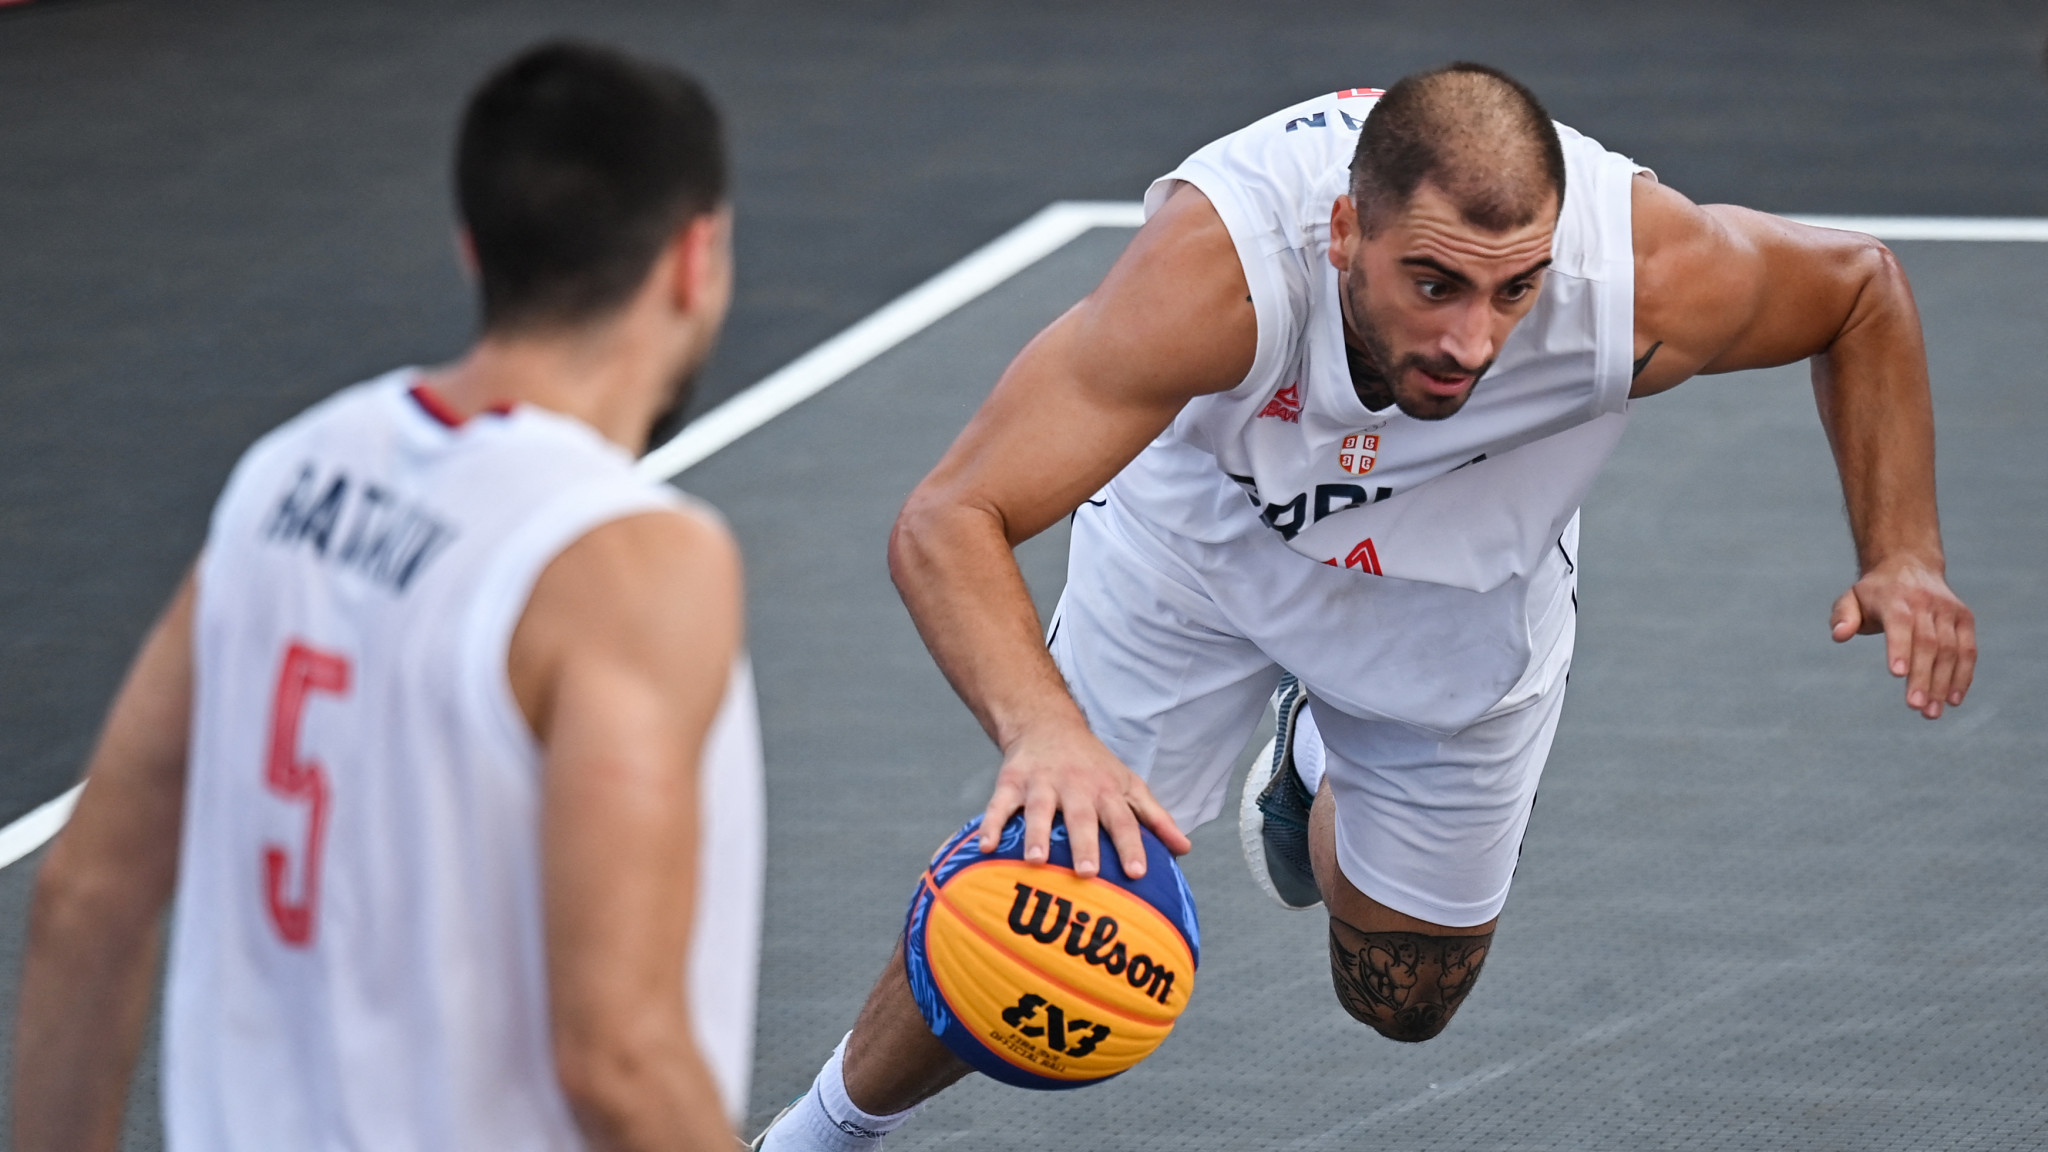 Serbia are looking for a fourth men's 3x3 Europe Cup title ©Getty Images